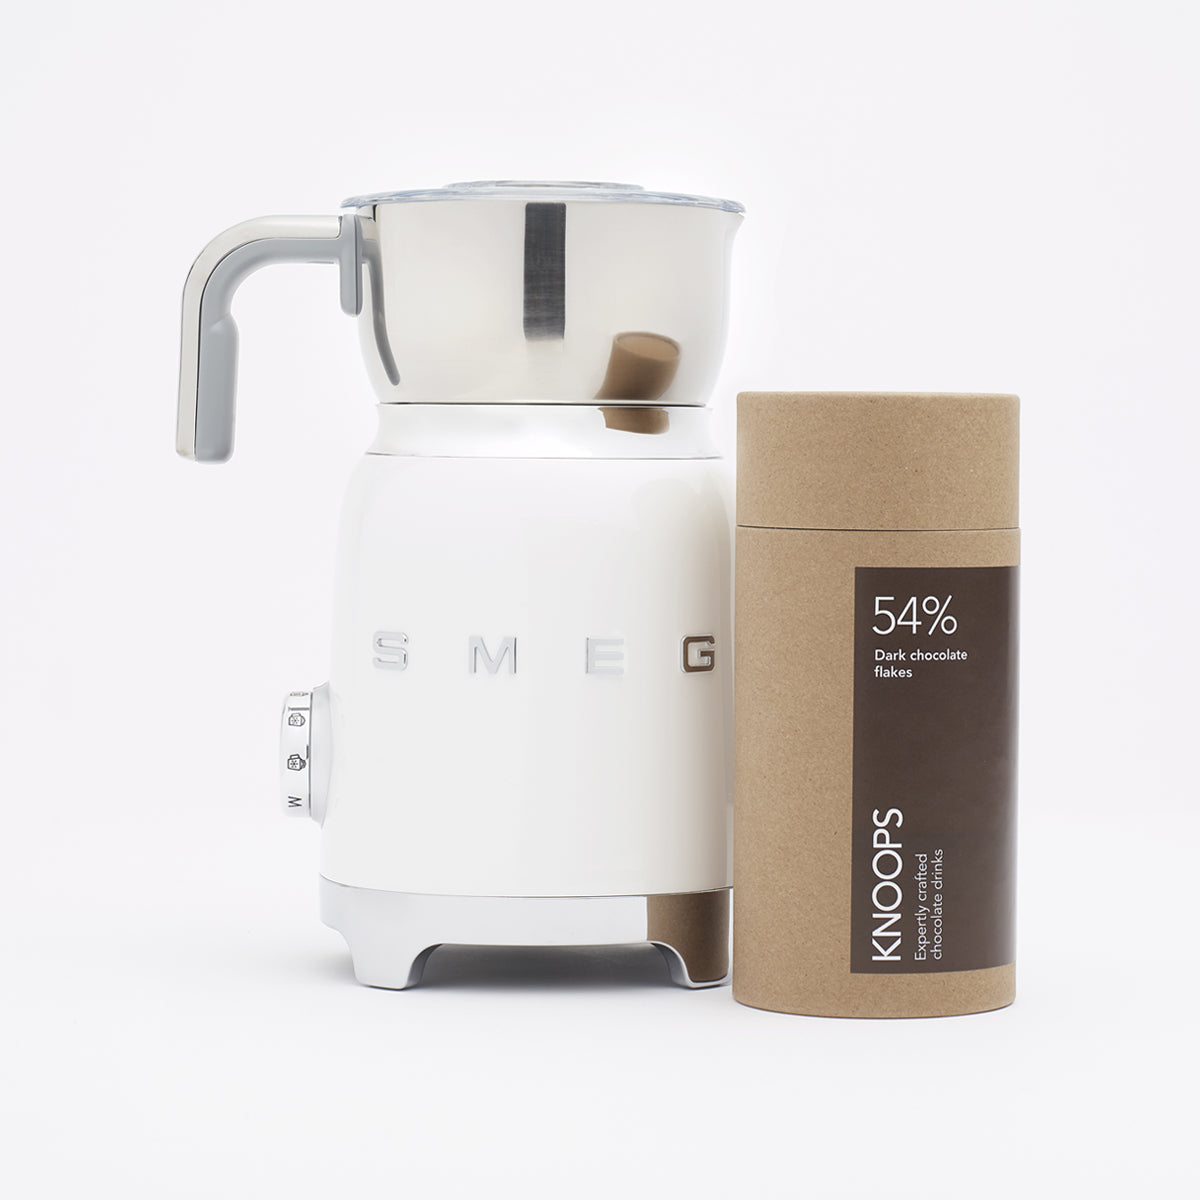 How to clean and maintain the Smeg Milk Frother, MFF01